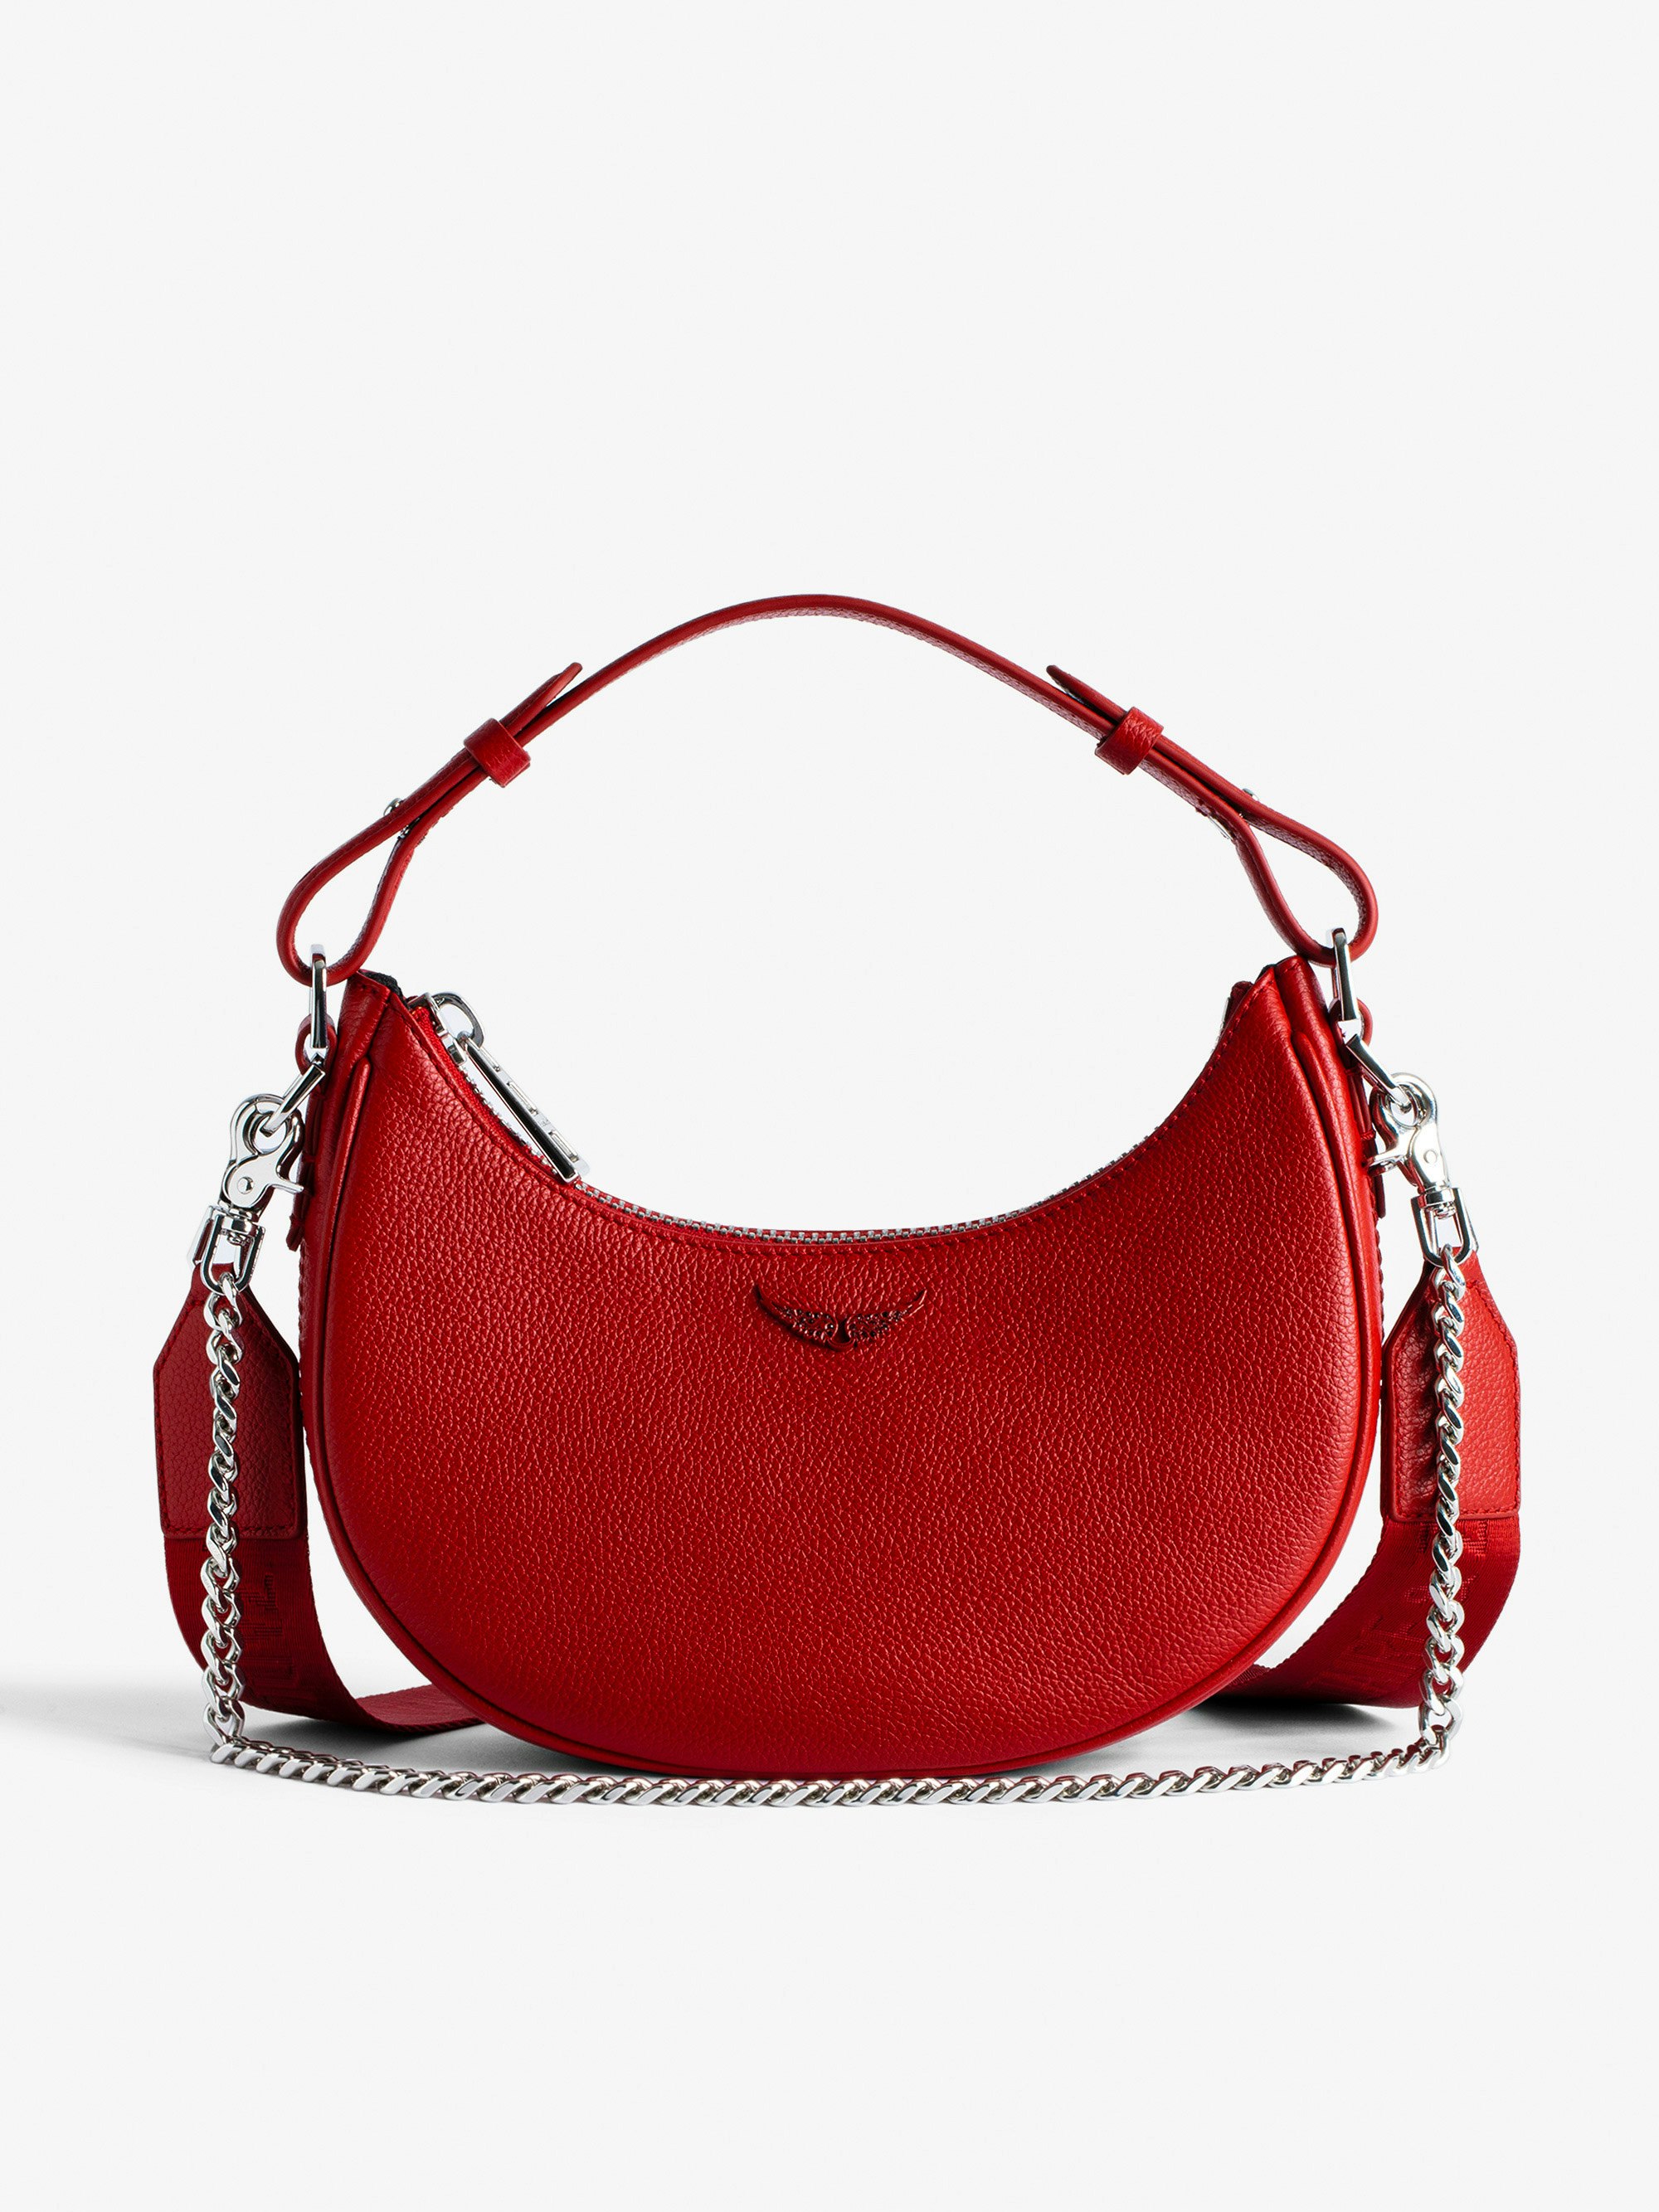 Moonrock Bag - Women’s half-moon bag in red grained leather with a short handle, shoulder strap, chain and signature wings.